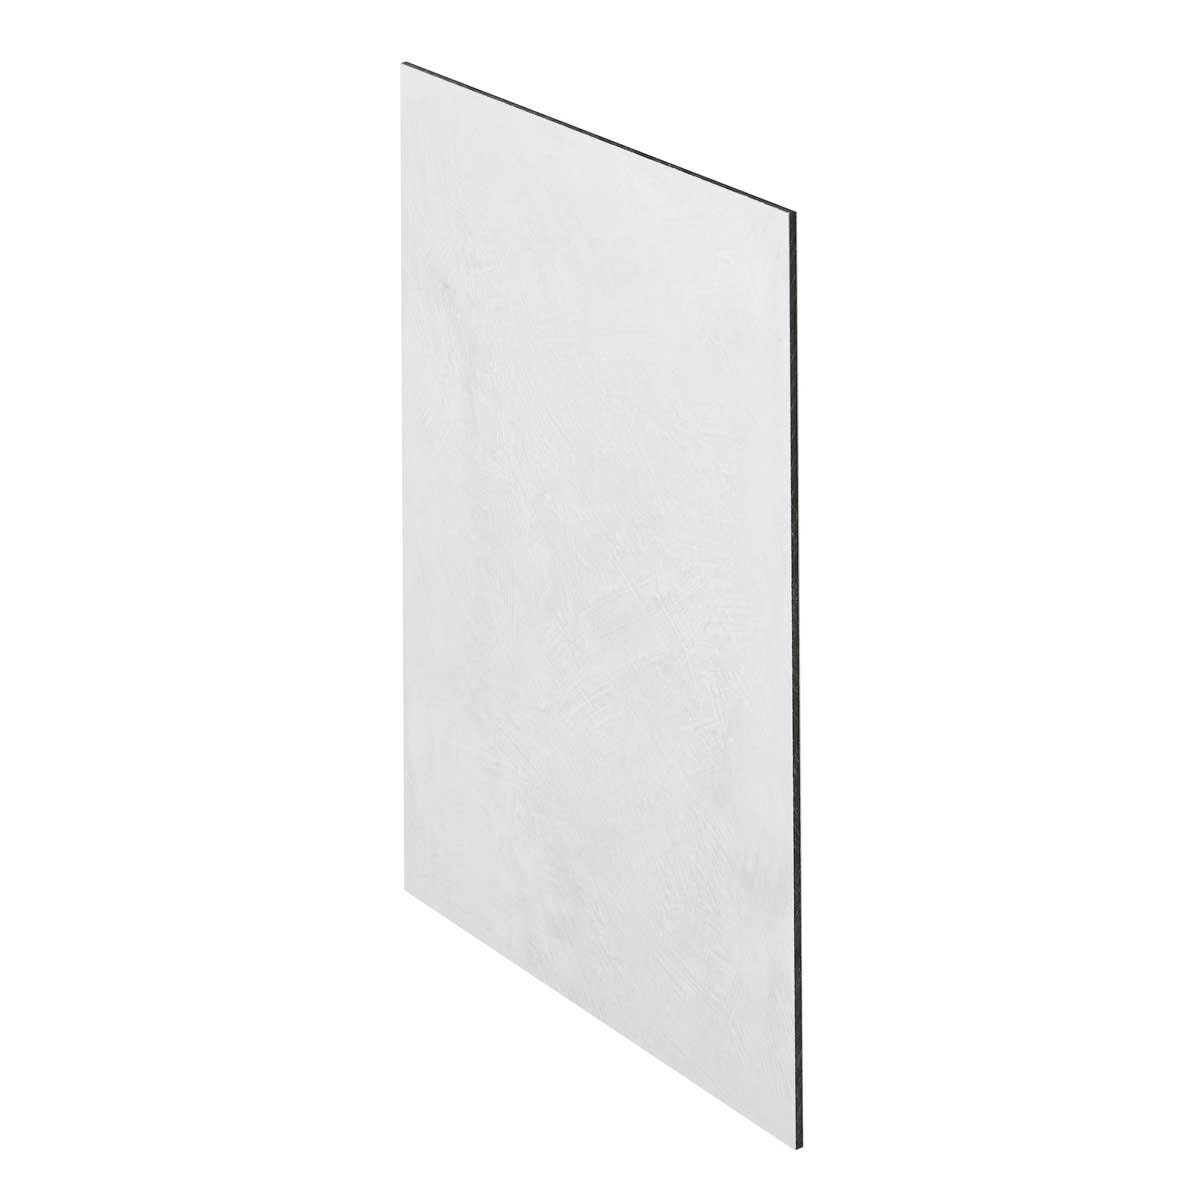 Pebeo White Synthetic or Natural Linen Canvas Boards in 30 X 30cm